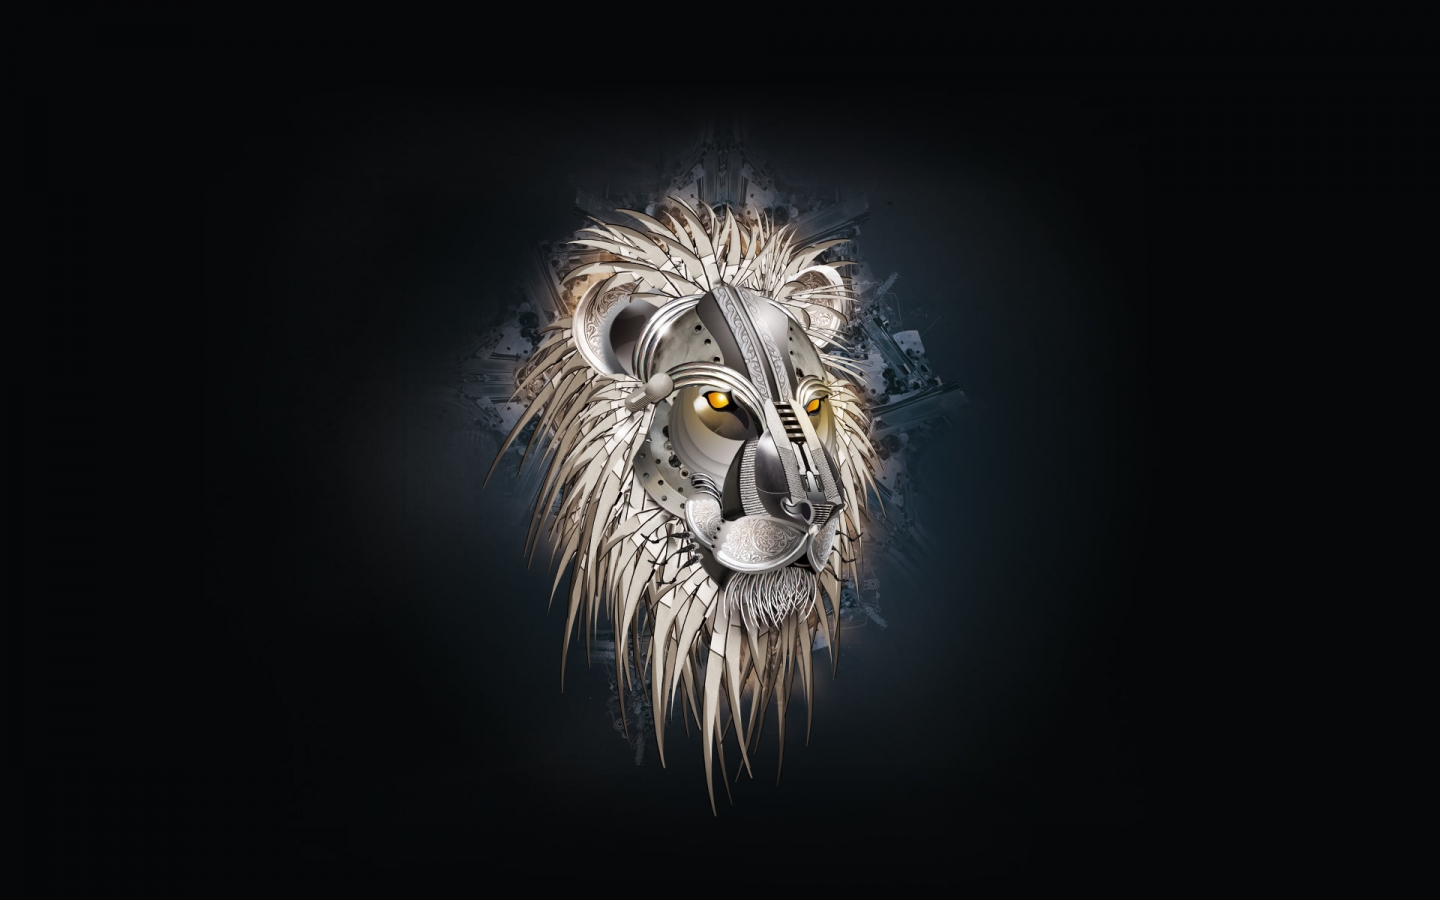 Lion head drawing for 1440 x 900 widescreen resolution